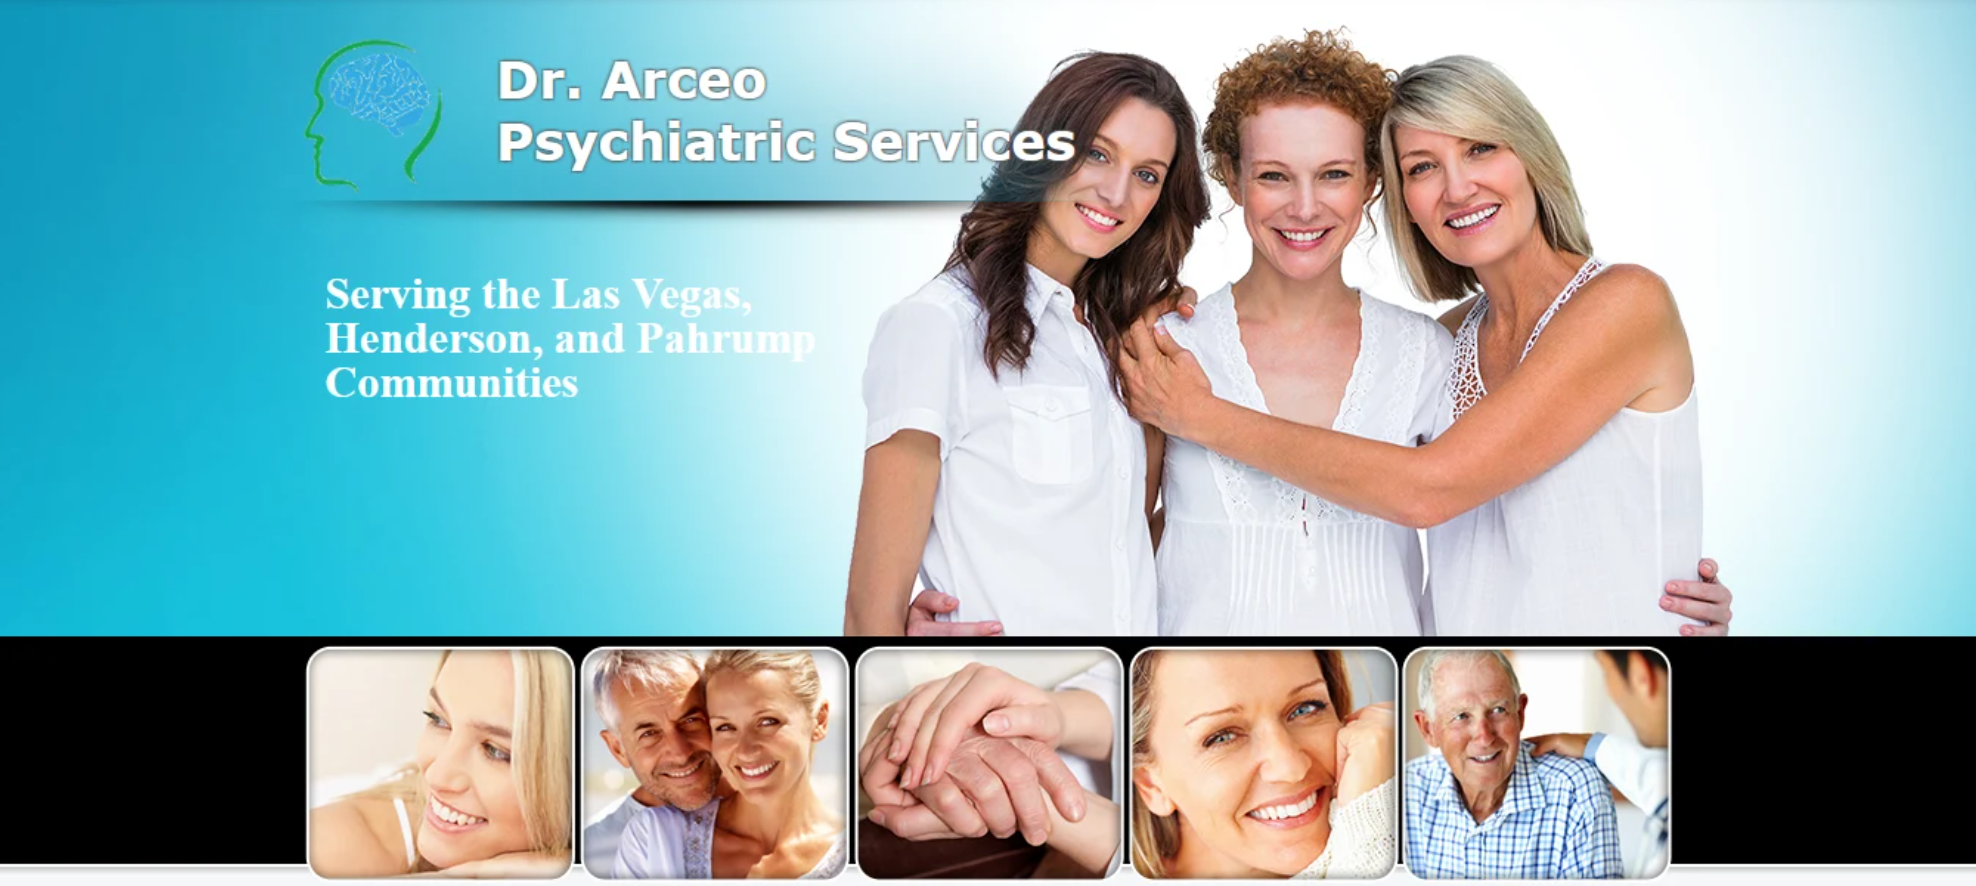 Dr. Arceo Psychiatric Services Enjoy Rave Reviews For Their Advanced Psychiatric Services